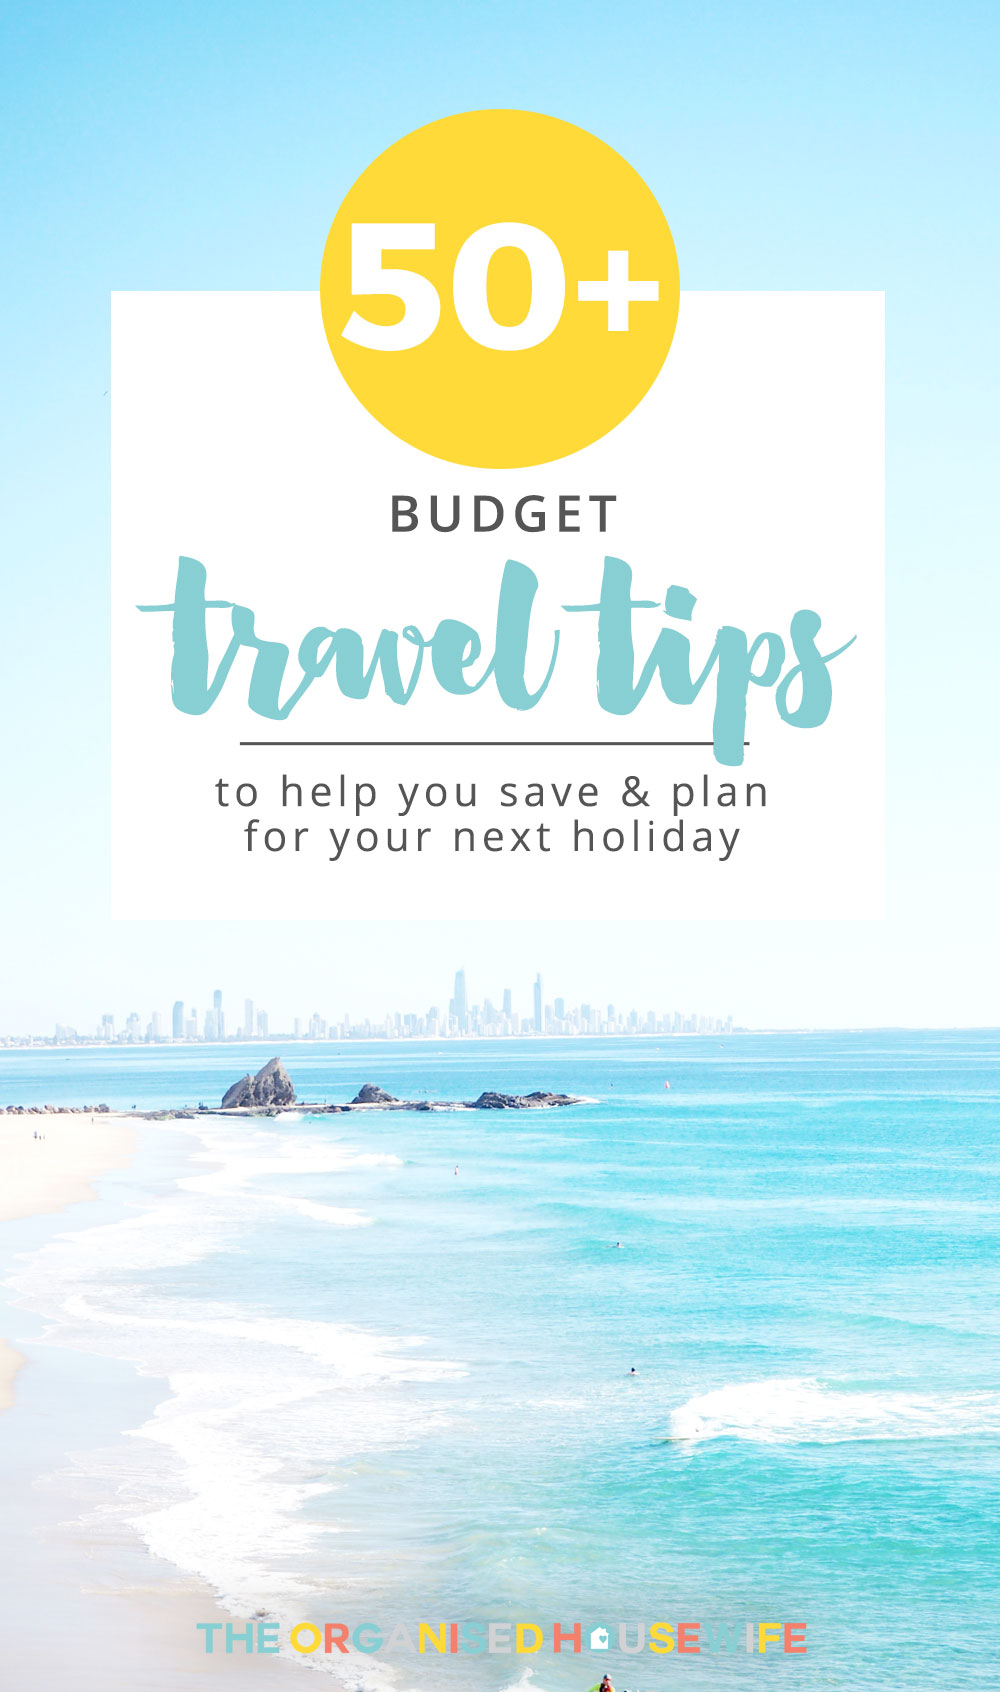 There are so many ways you can save money through planning, flights, accommodation, food and travel. Start planning your holiday now using some of my budget travel tips to help you save money on your next holiday.